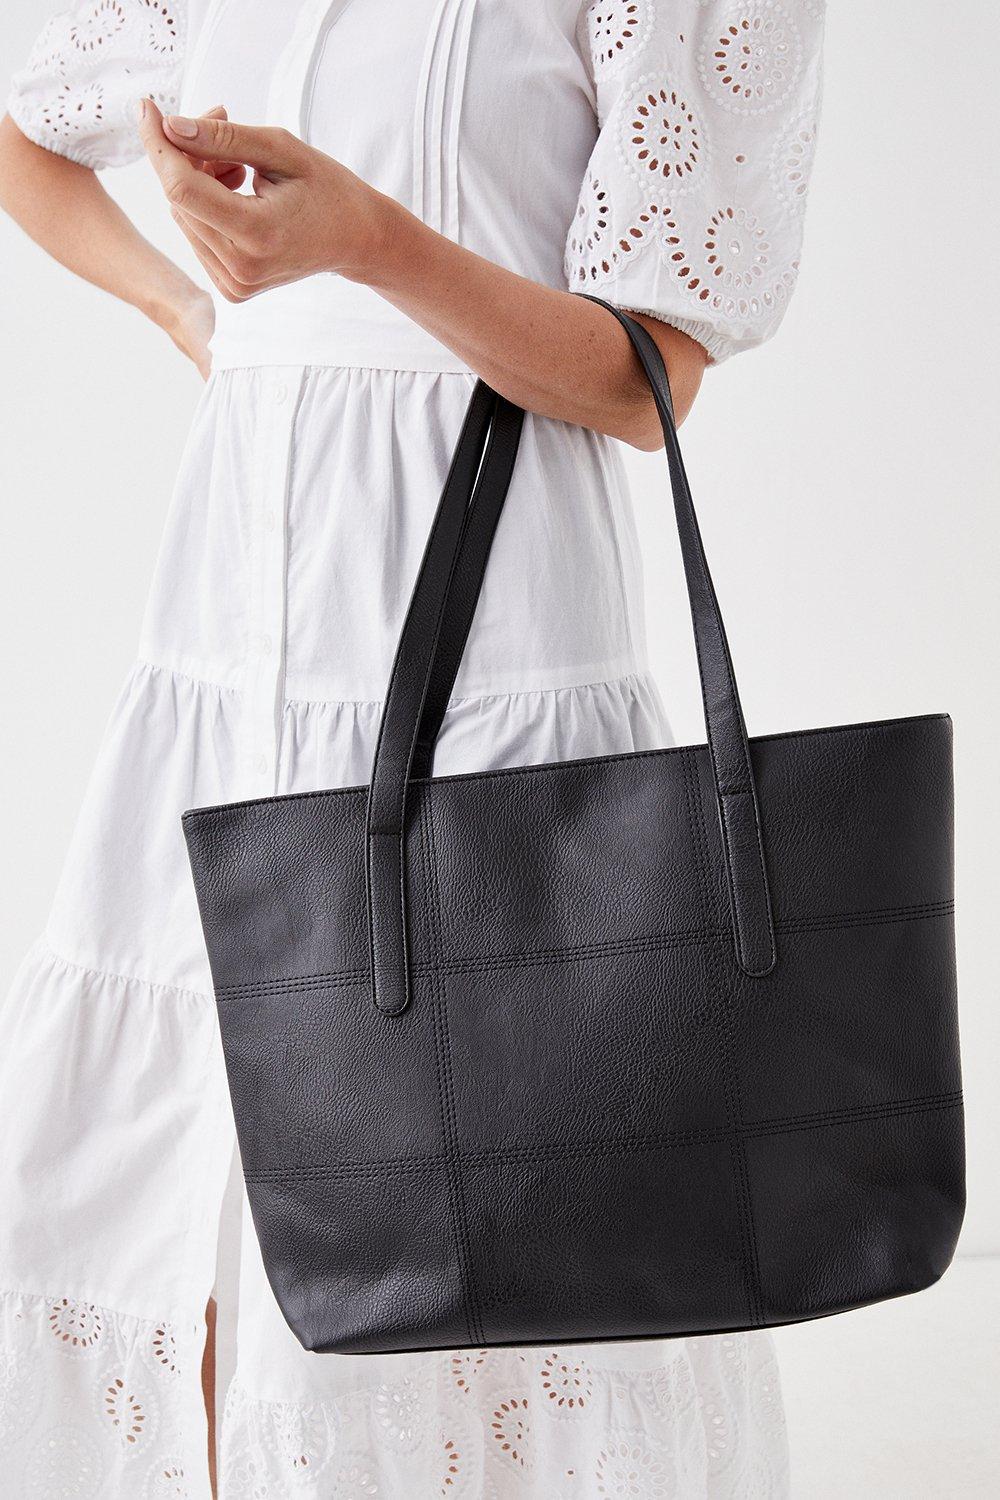 Women's Trish Stitched Tote Bag - black - ONE SIZE